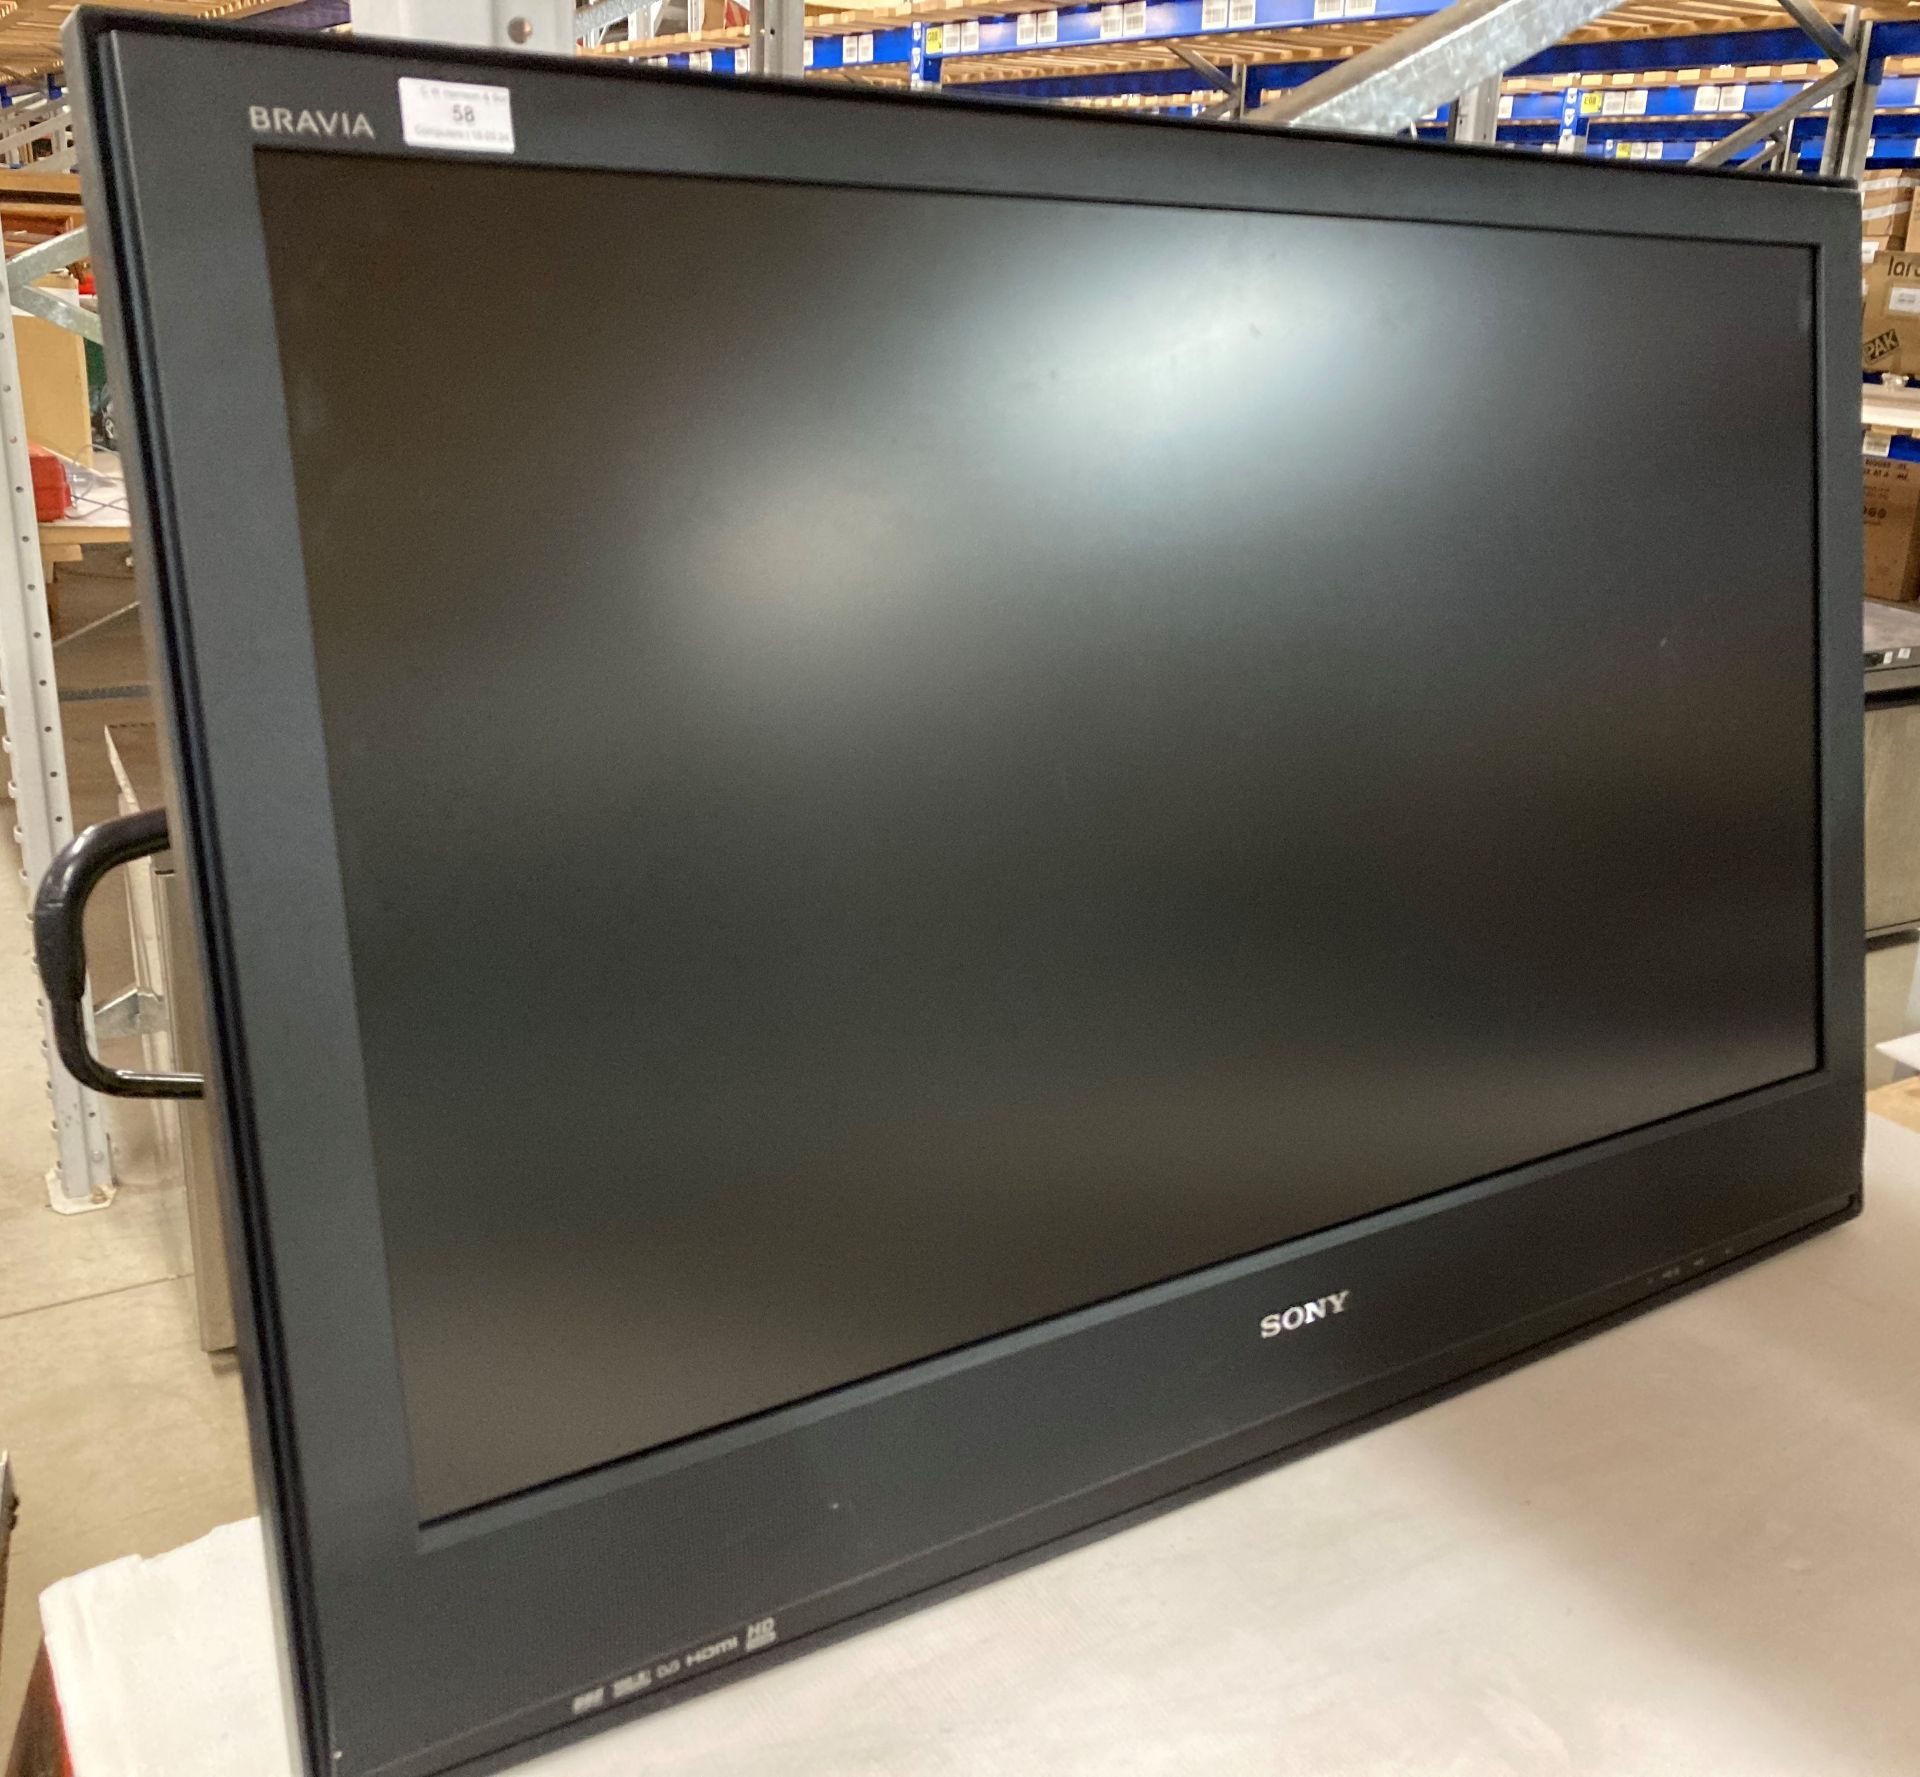 Sony Bravia 40" wall mounted TV - complete with power lead,